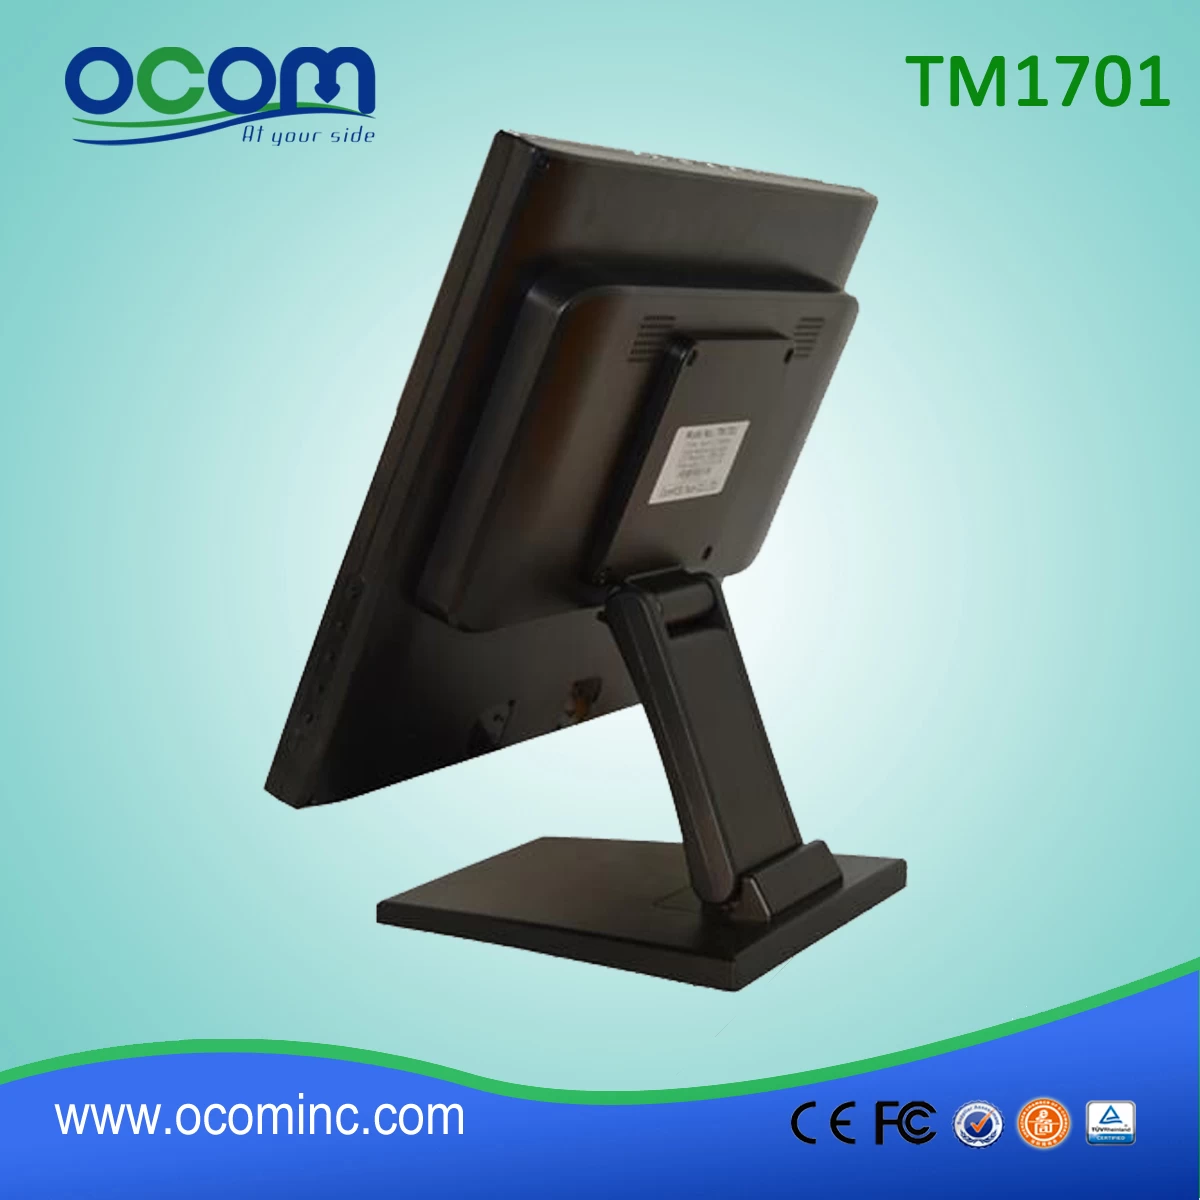 TM1701 Capacitive Cash Register Touch Screen Monitor